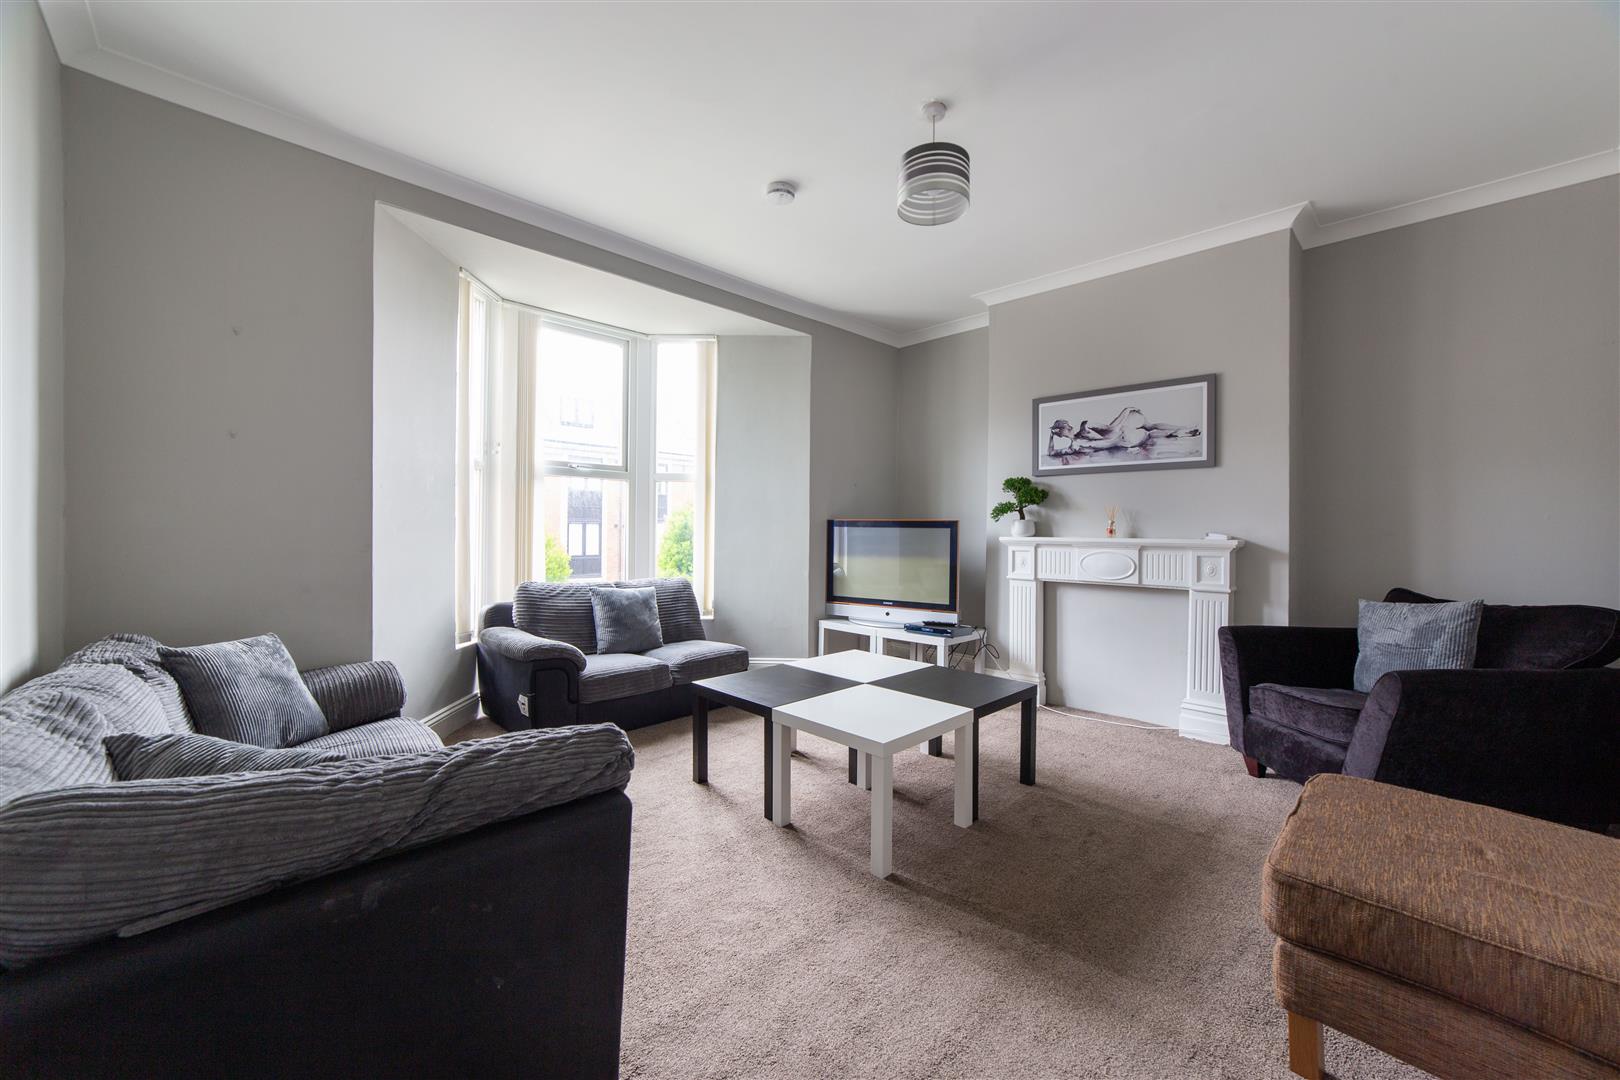 5 bed terraced house to rent in Portland Road, Sandyford - Property Image 1